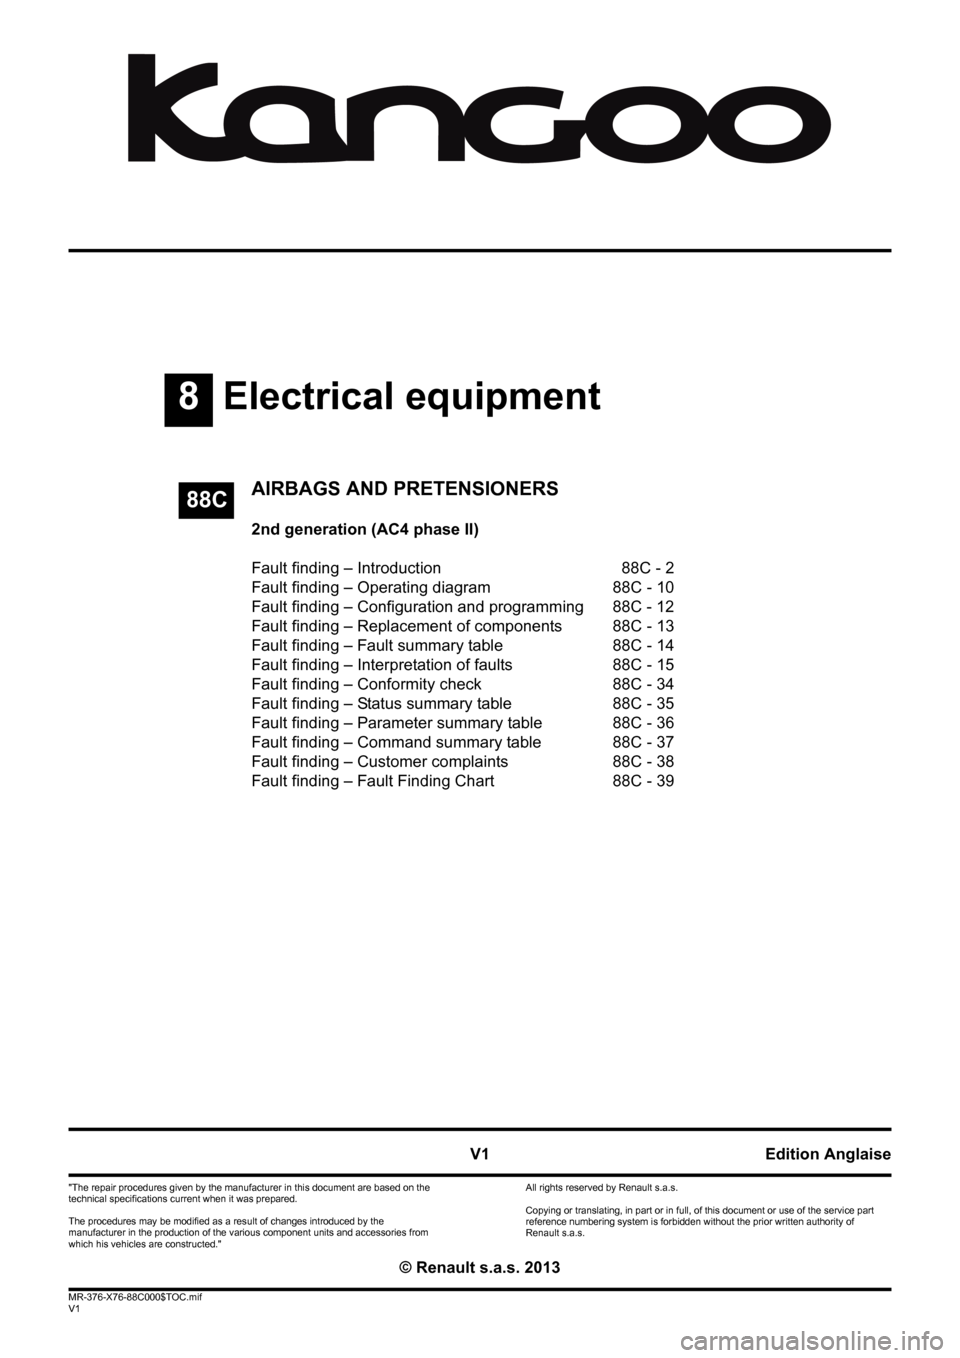 RENAULT KANGOO 2013 X61 / 2.G Air Bags AC4 And Pretensioners Workshop Manual 8Electrical equipment
V1 MR-376-X76-88C000$TOC.mif
V1
88C
"The repair procedures given by the manufacturer in this document are based on the 
technical specifications current when it was prepared.
The